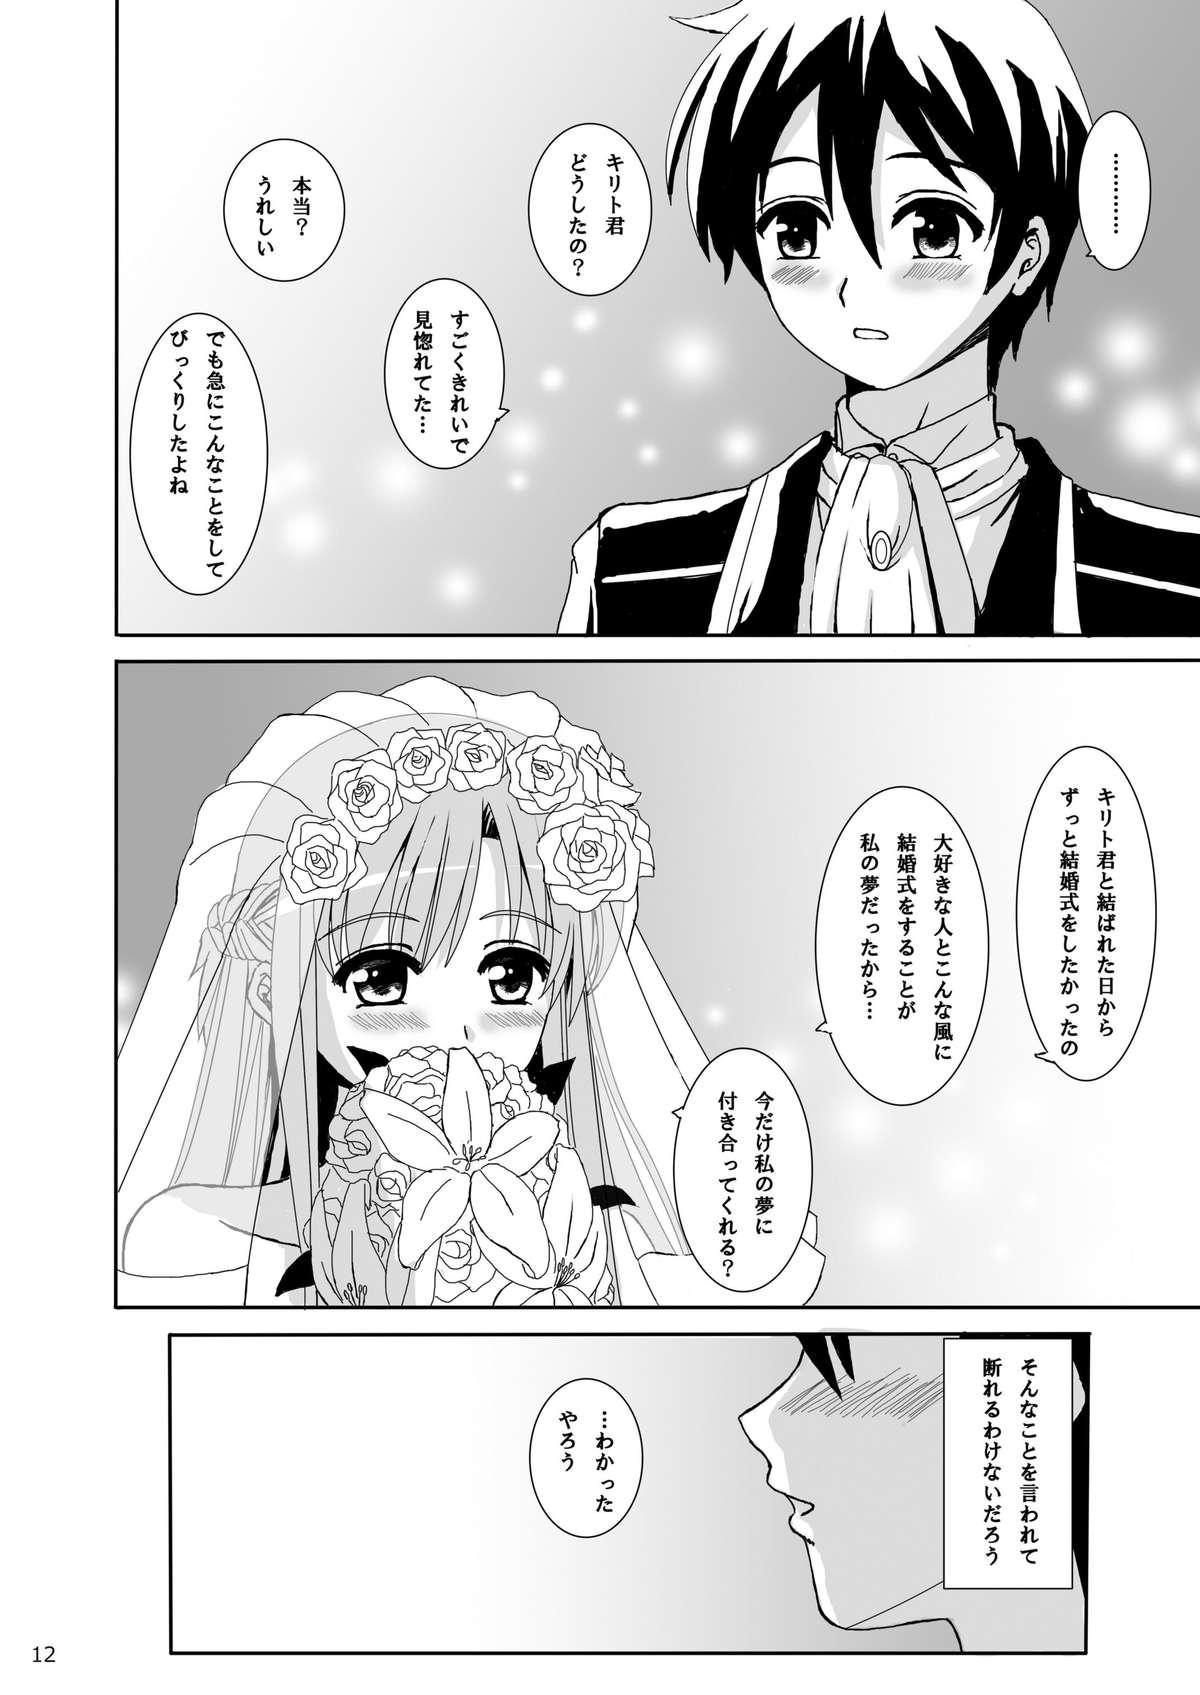 Tribbing WEDDING BELL - Sword art online 3some - Page 12